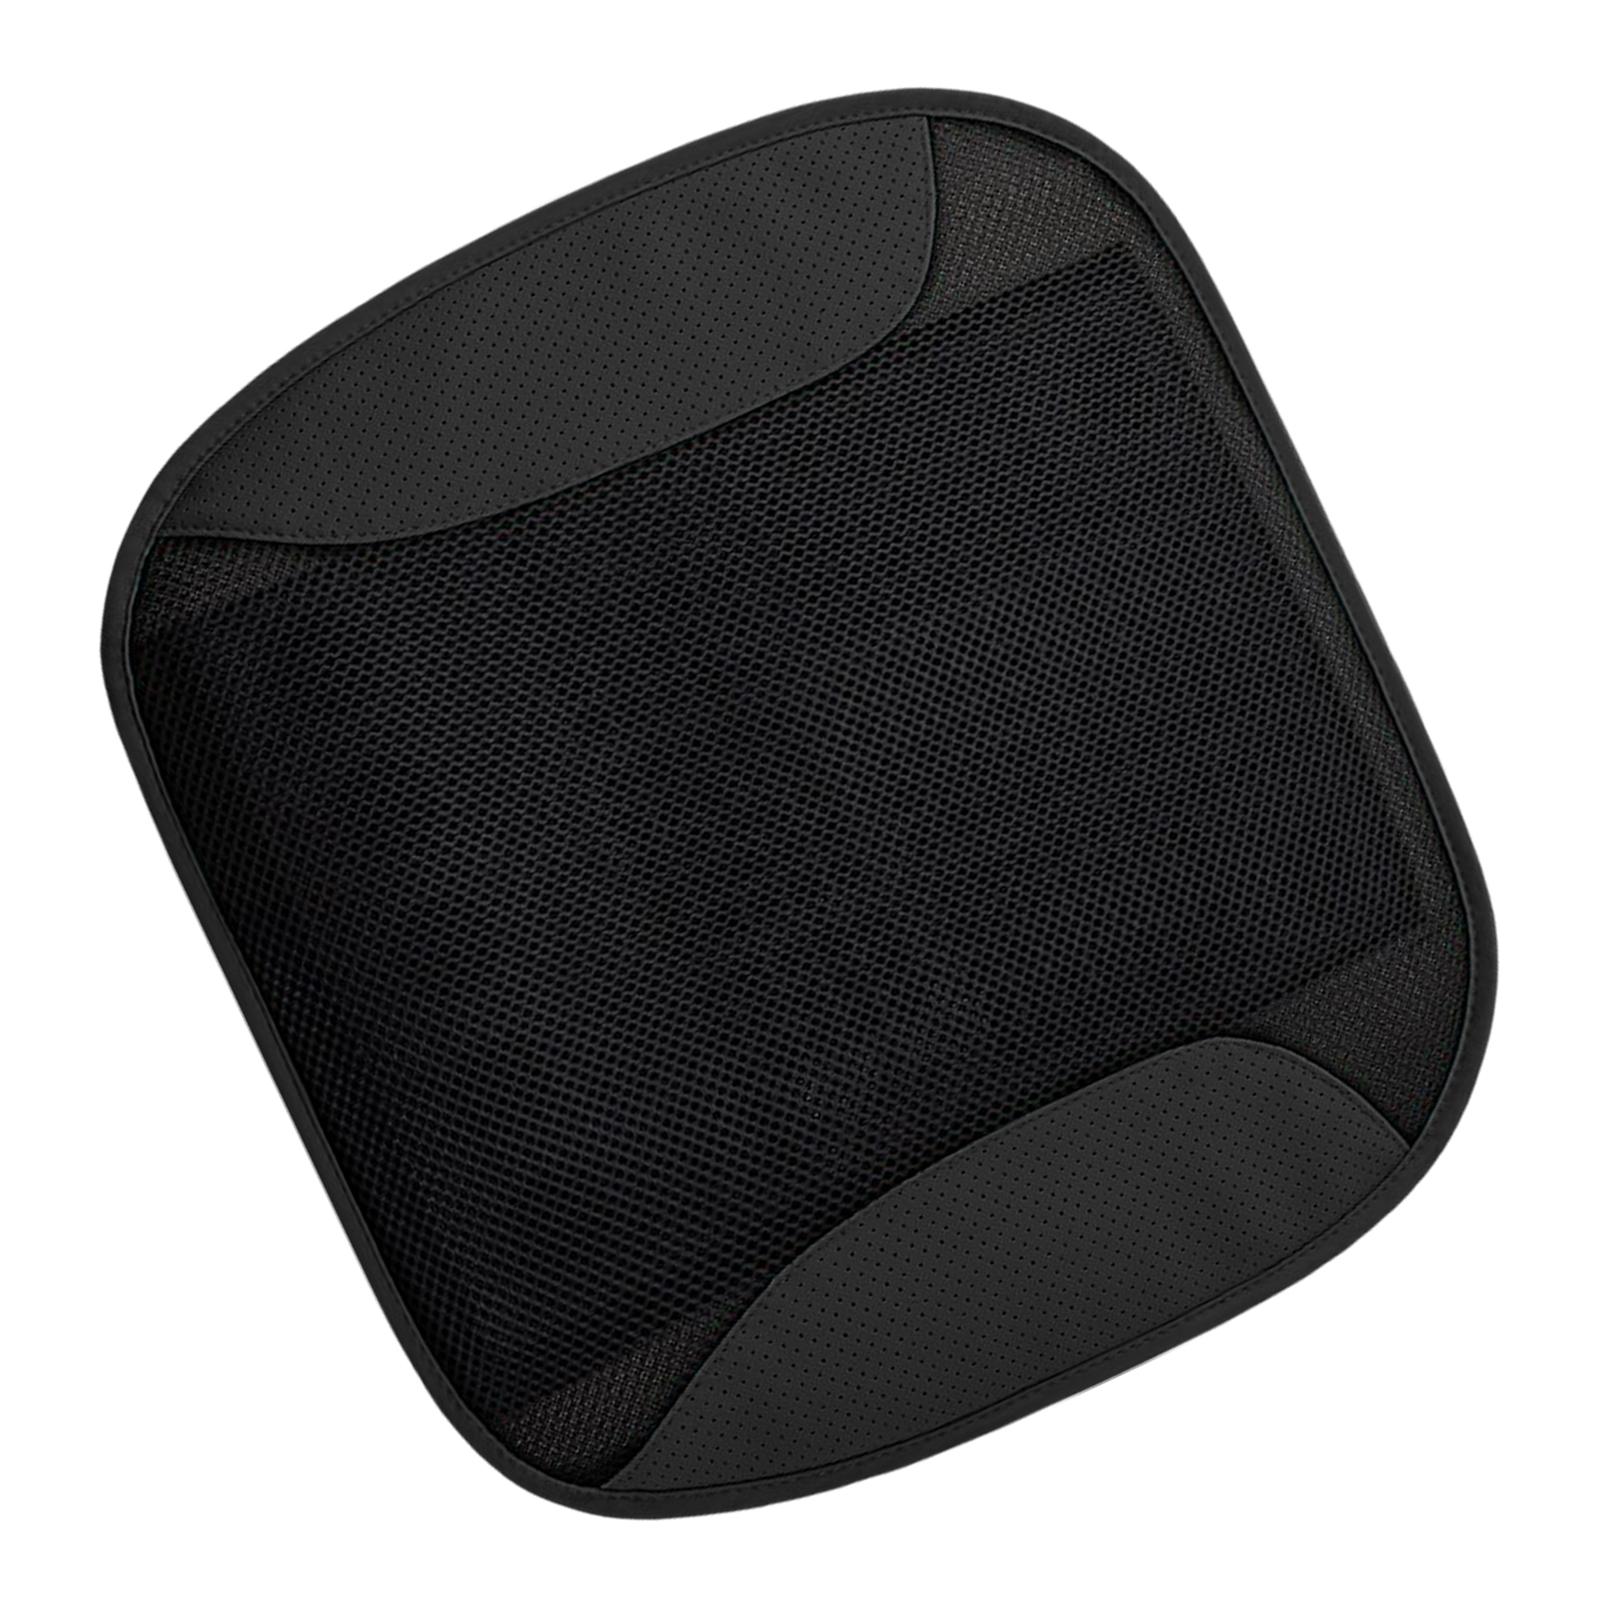 Car Seat Cover USB Port 5 Cooling Fans Inside for Office Chair Car Black